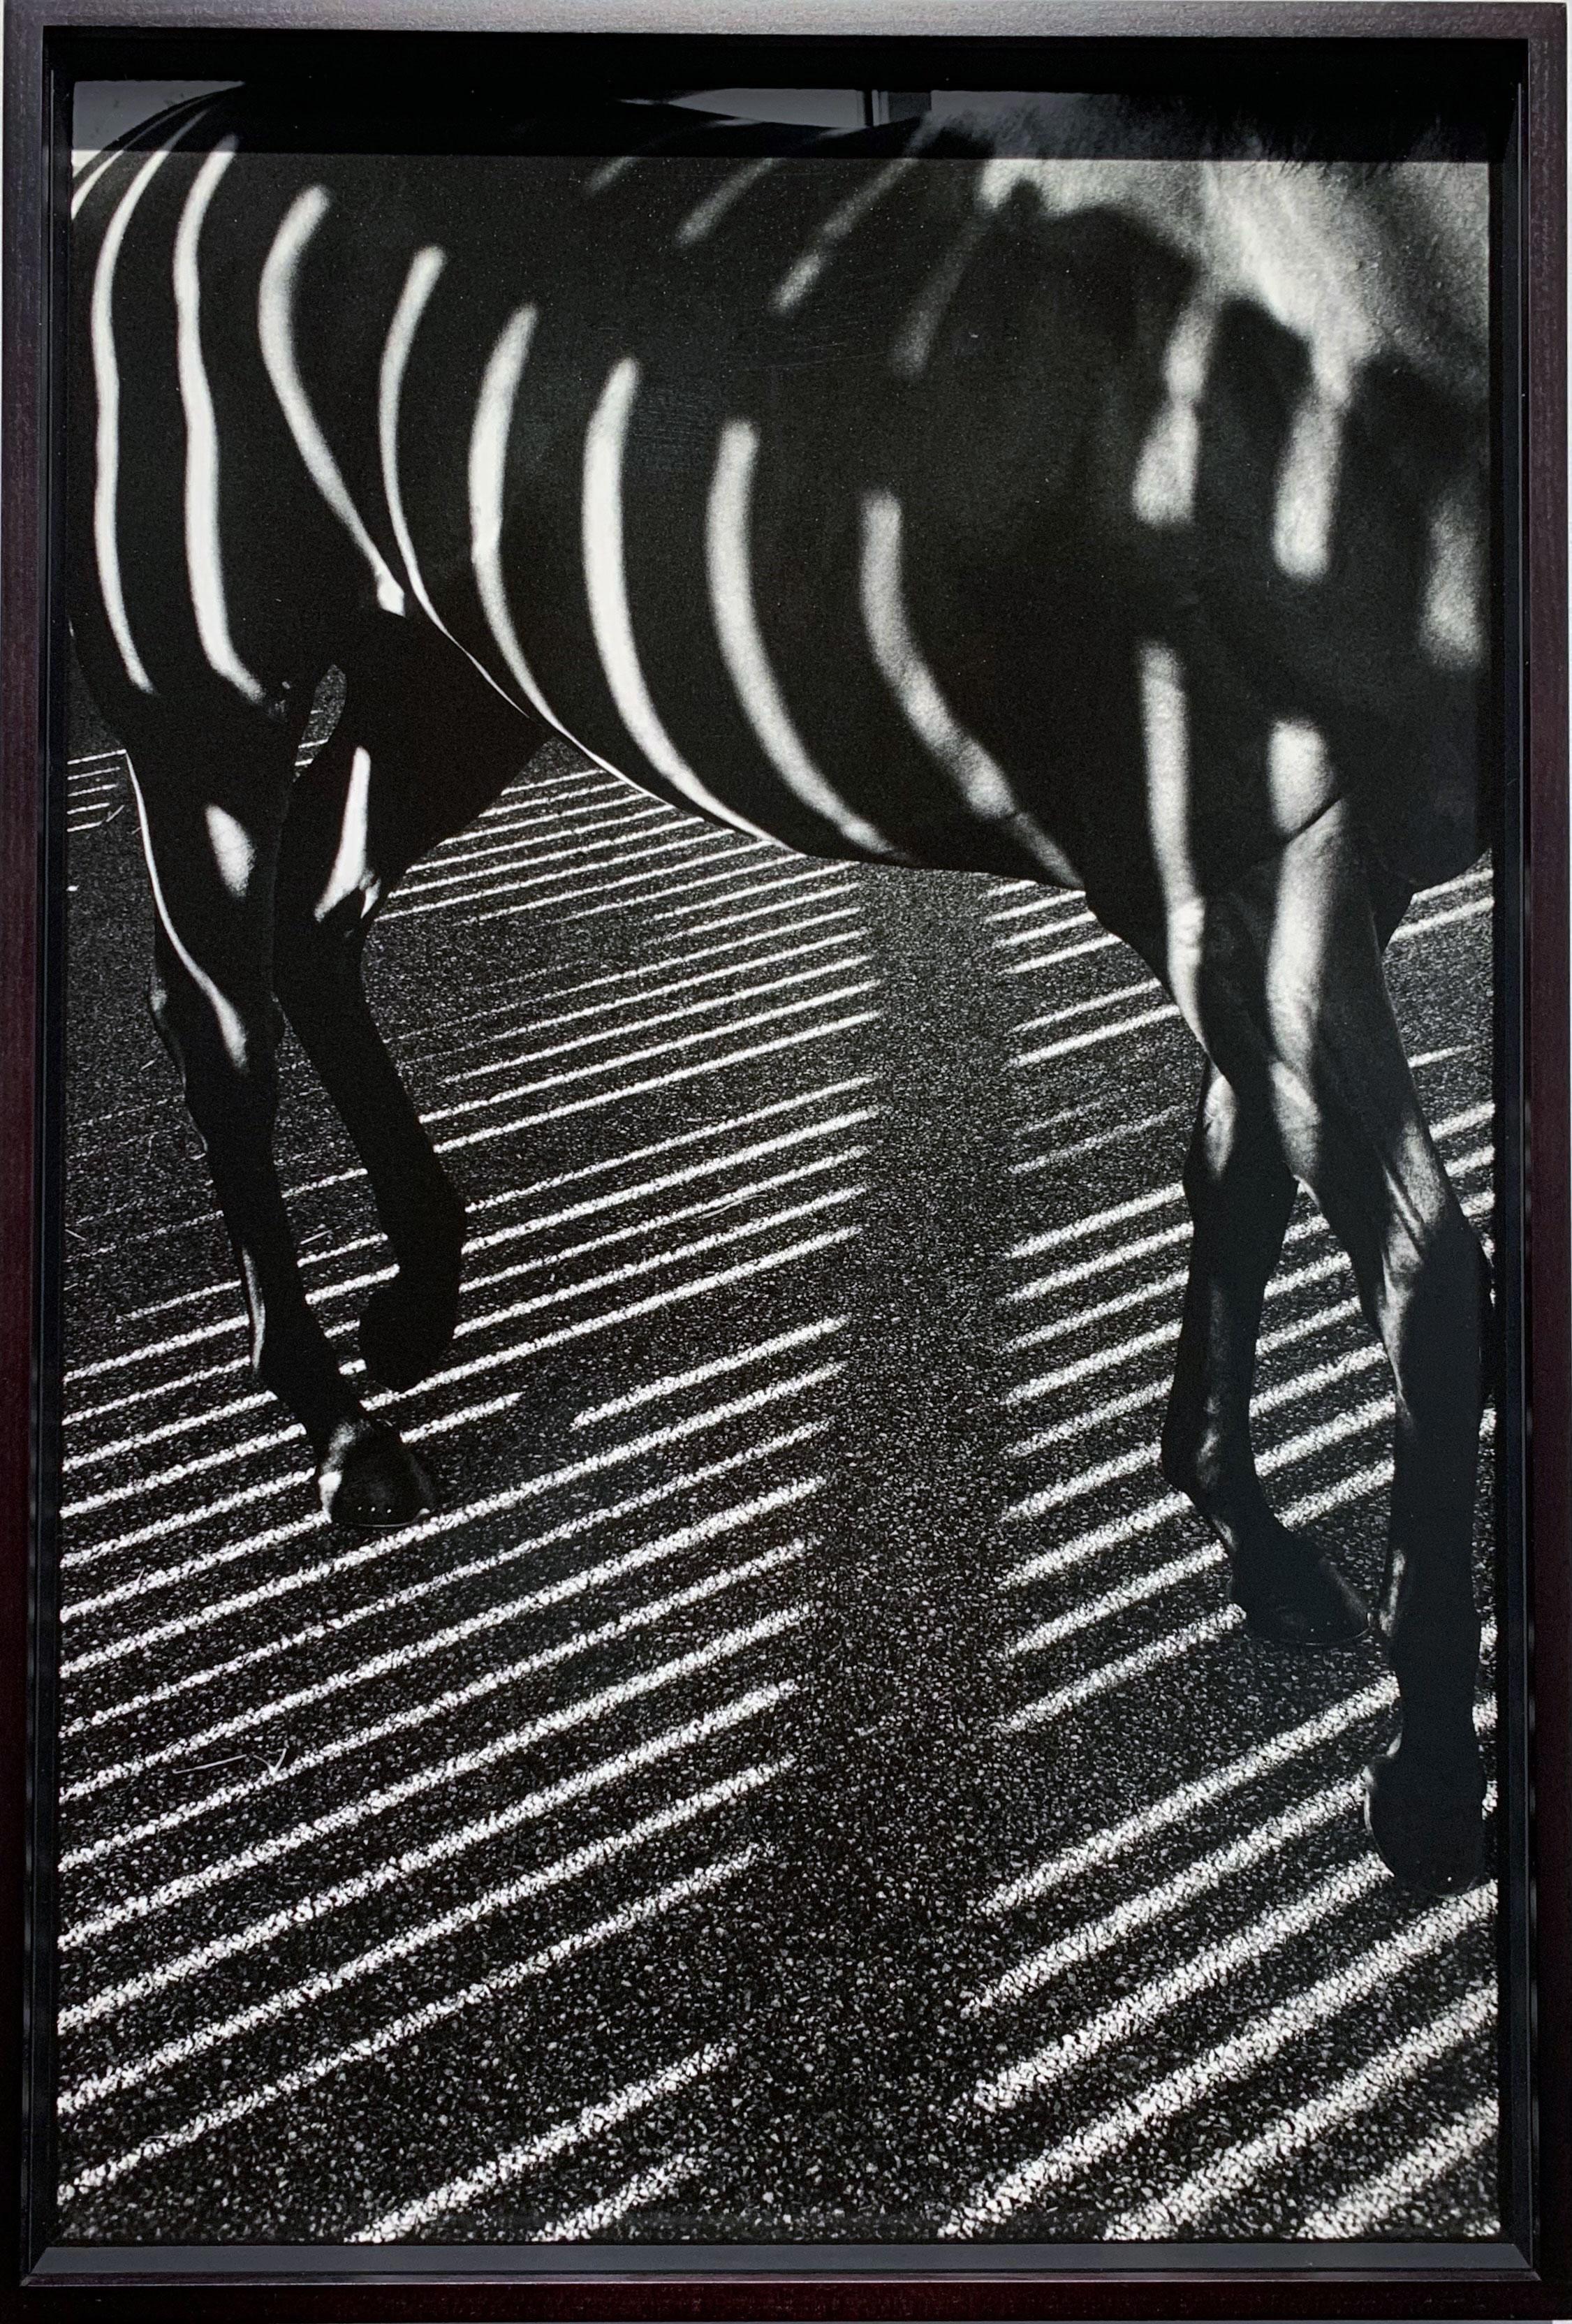 Dubawi, ‘Striped/ shadows', Abstract Black and white horse portrait photograph - Contemporary Photograph by John Reardon